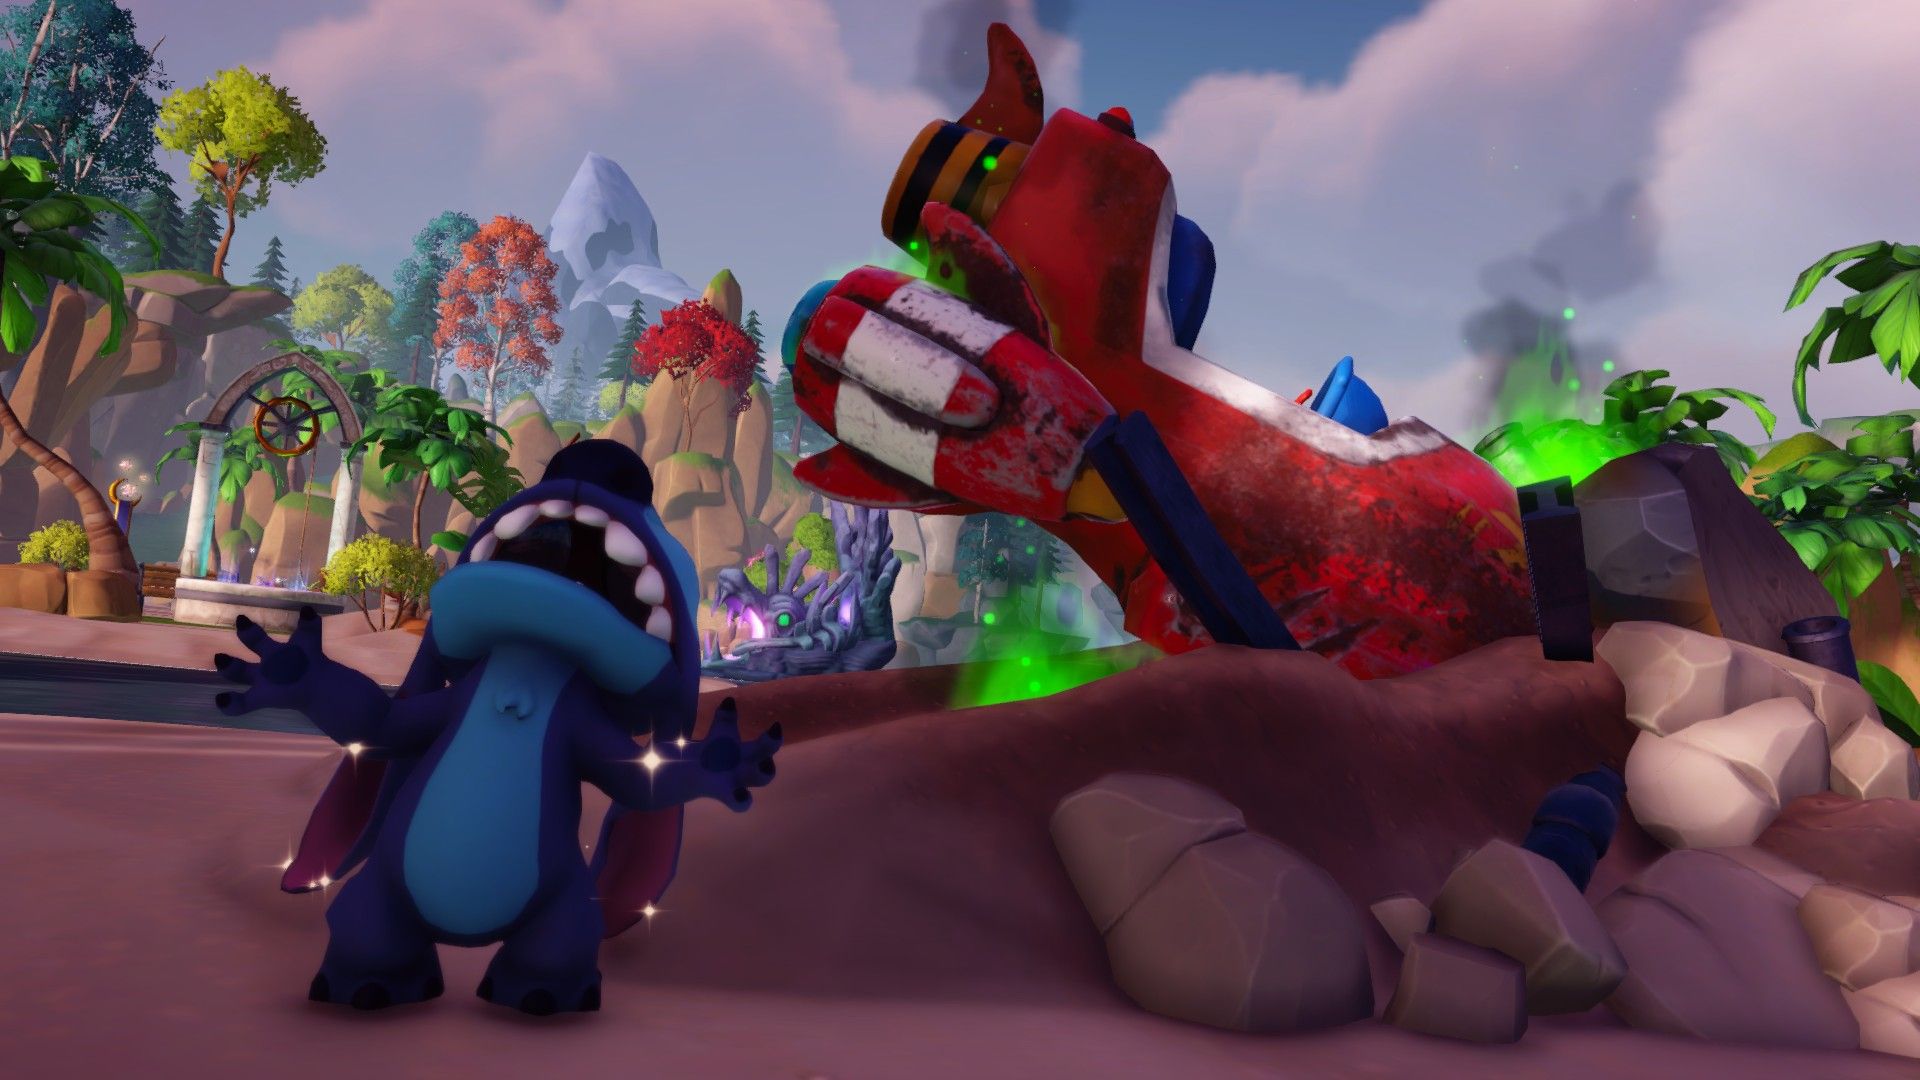 Stitch annoyed at his crashed spaceship after he lands on the beach in Dreamlight Valley